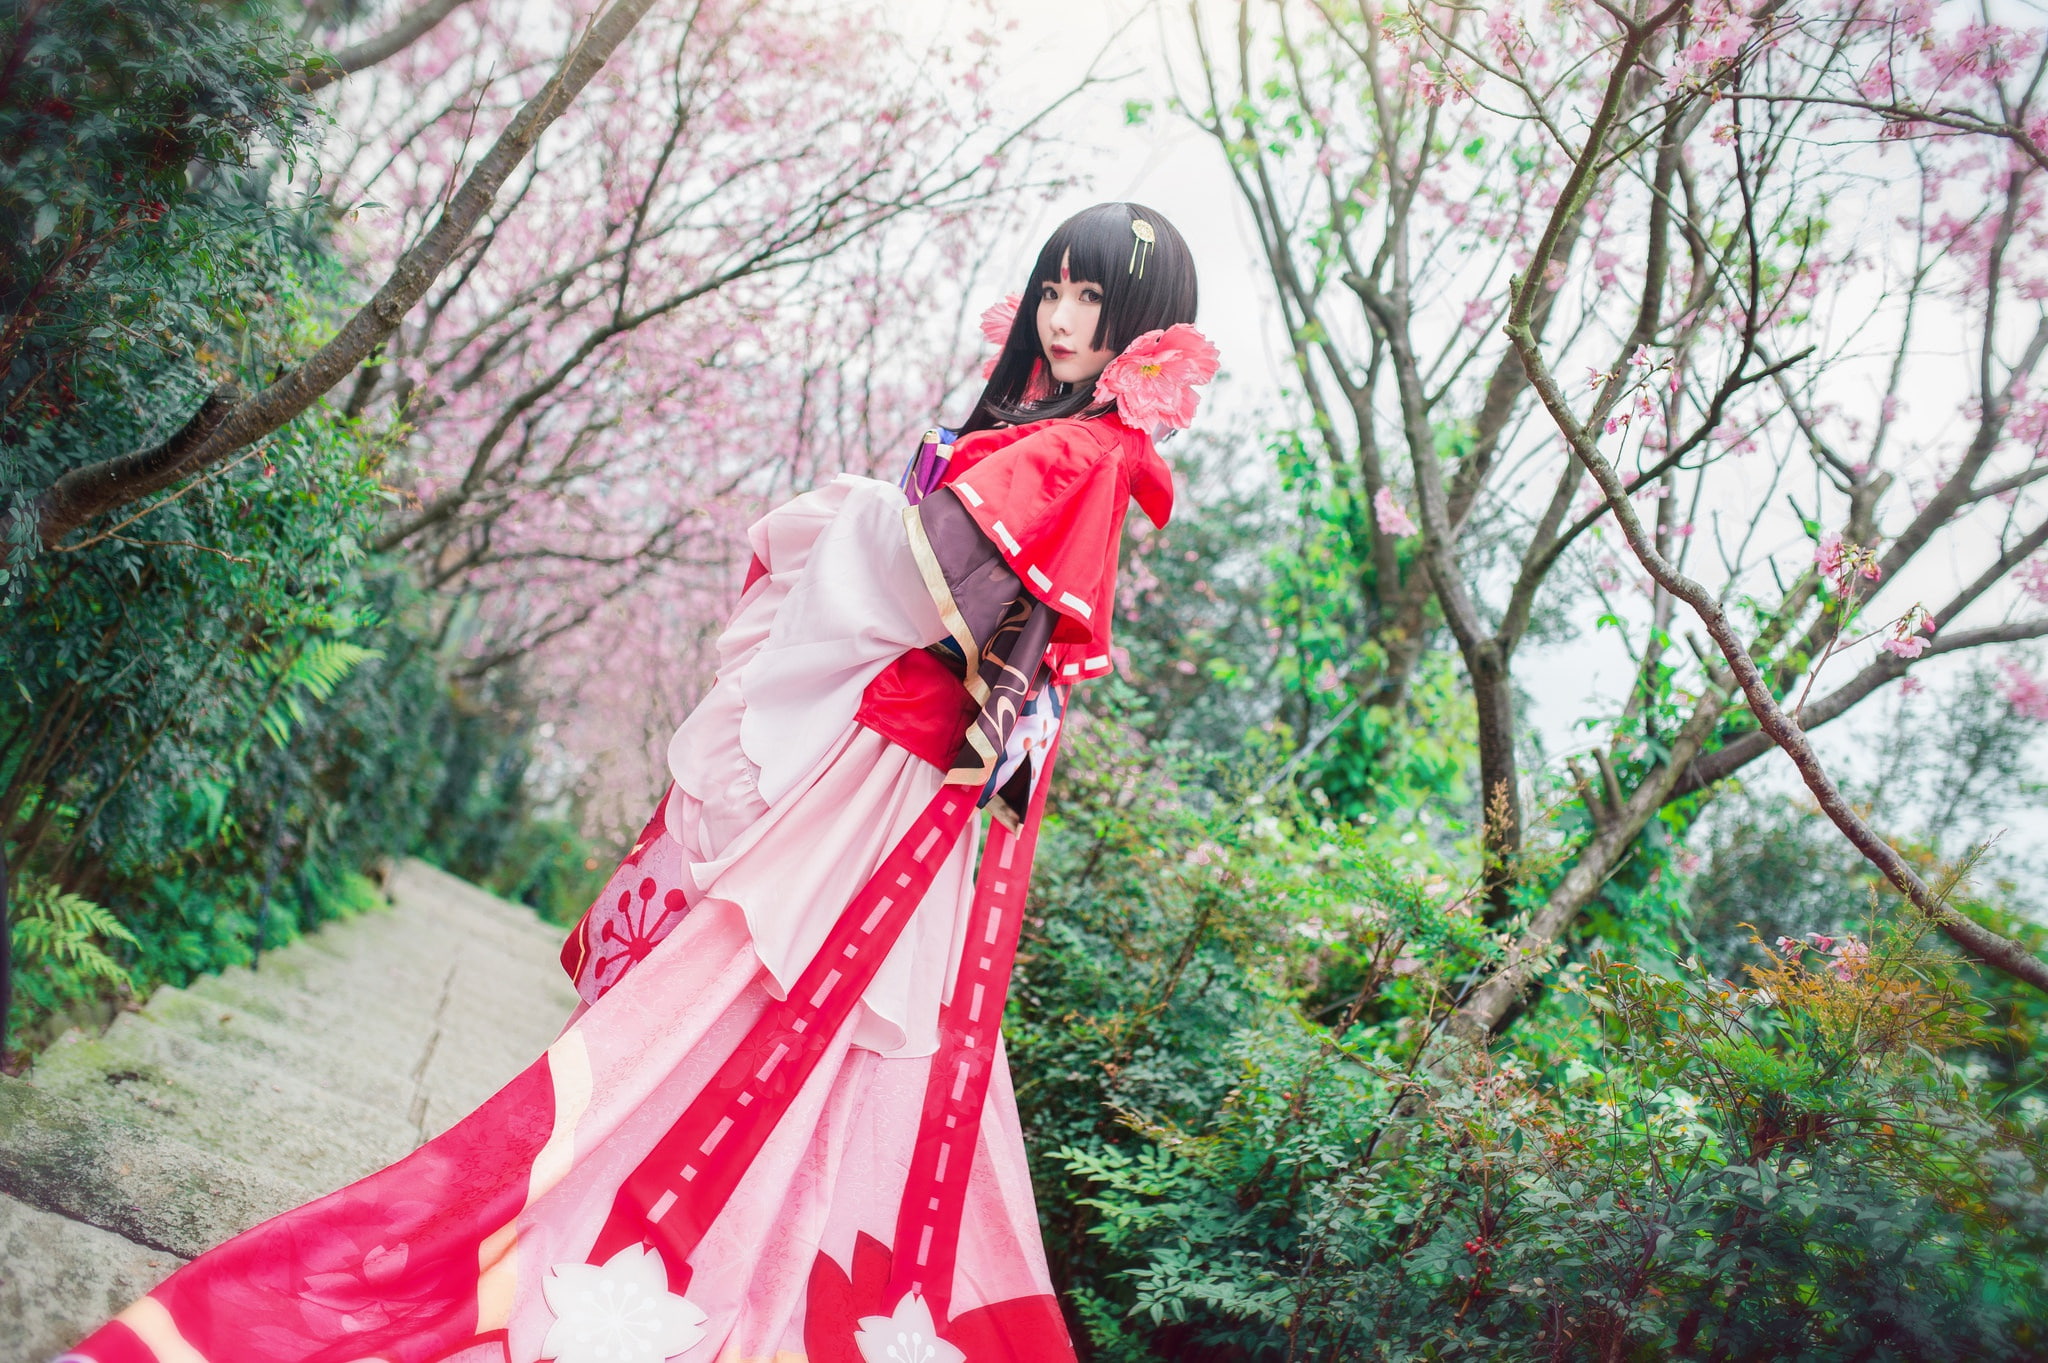 greens, look, girl, trees, flowers, branches, red, cherry, pose